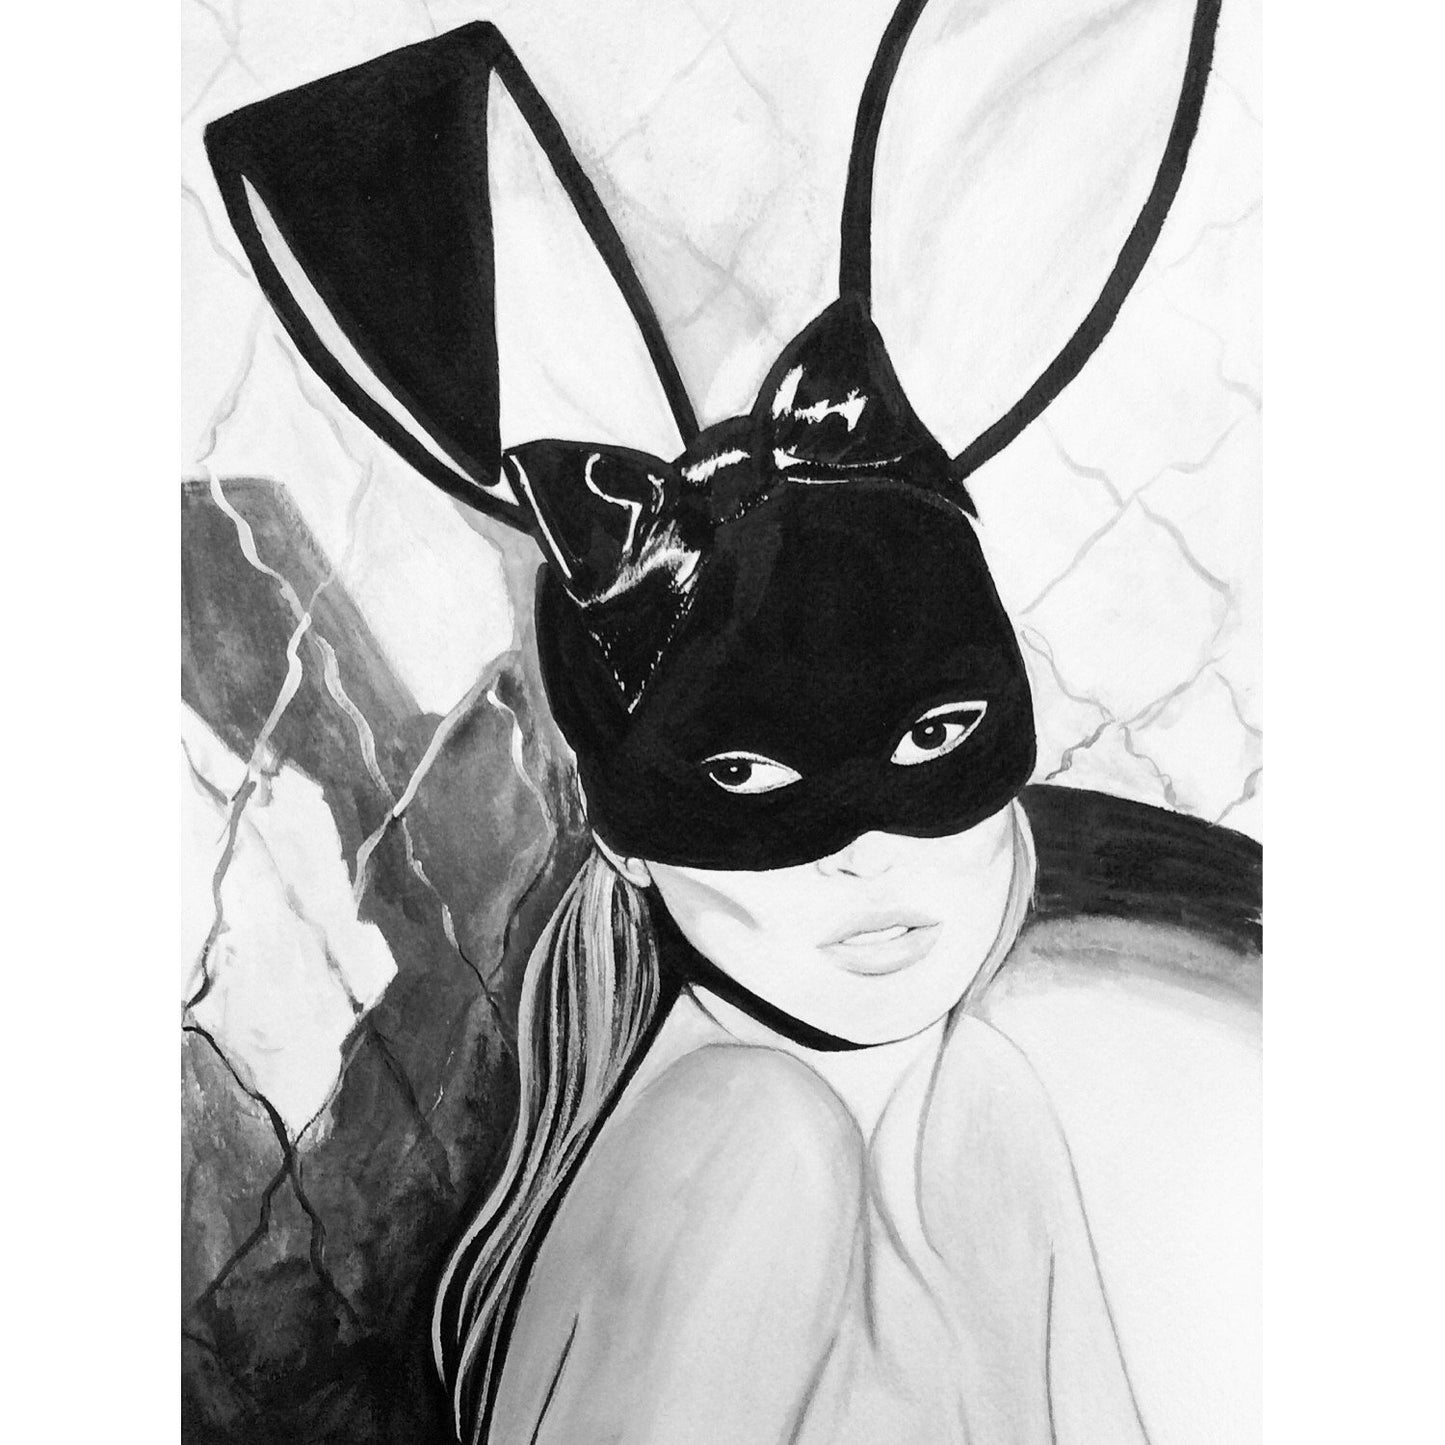 Black and White Kate Moss Painting - Mert Alas and Marcus Piggott's photoshoot for Playboy. 